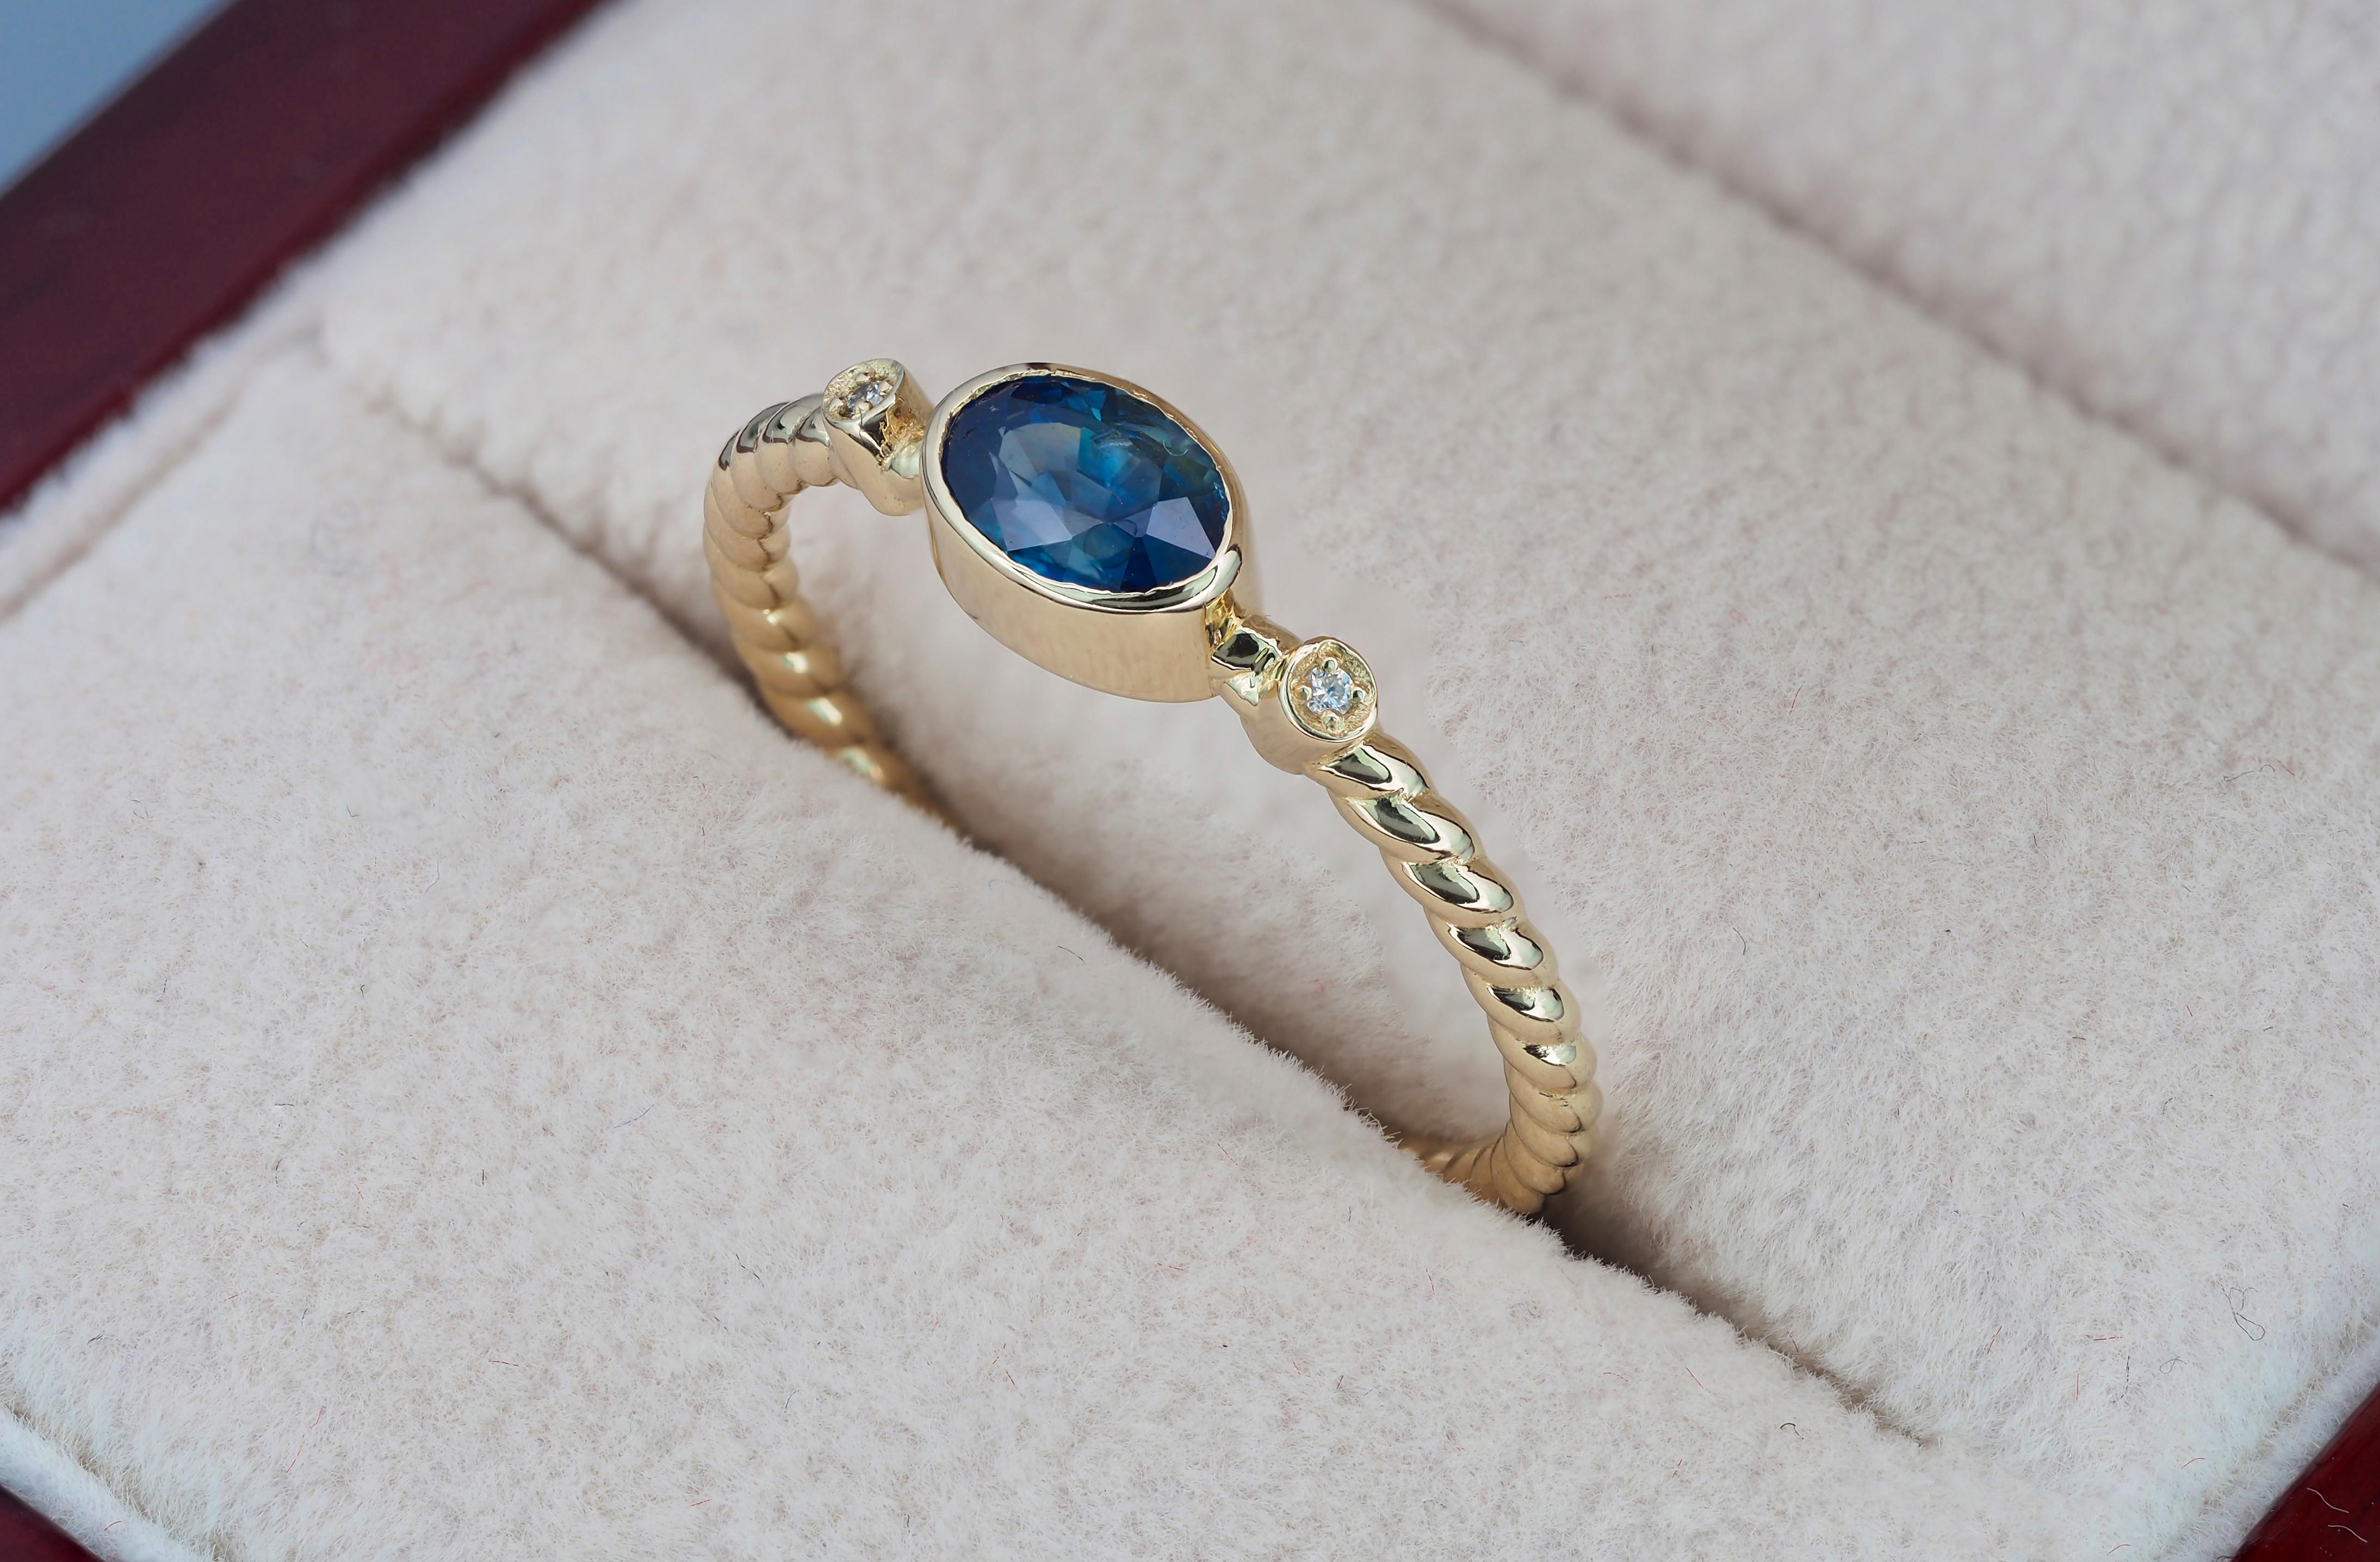 For Sale:  Blue sapphire ring in 14k gold.  6